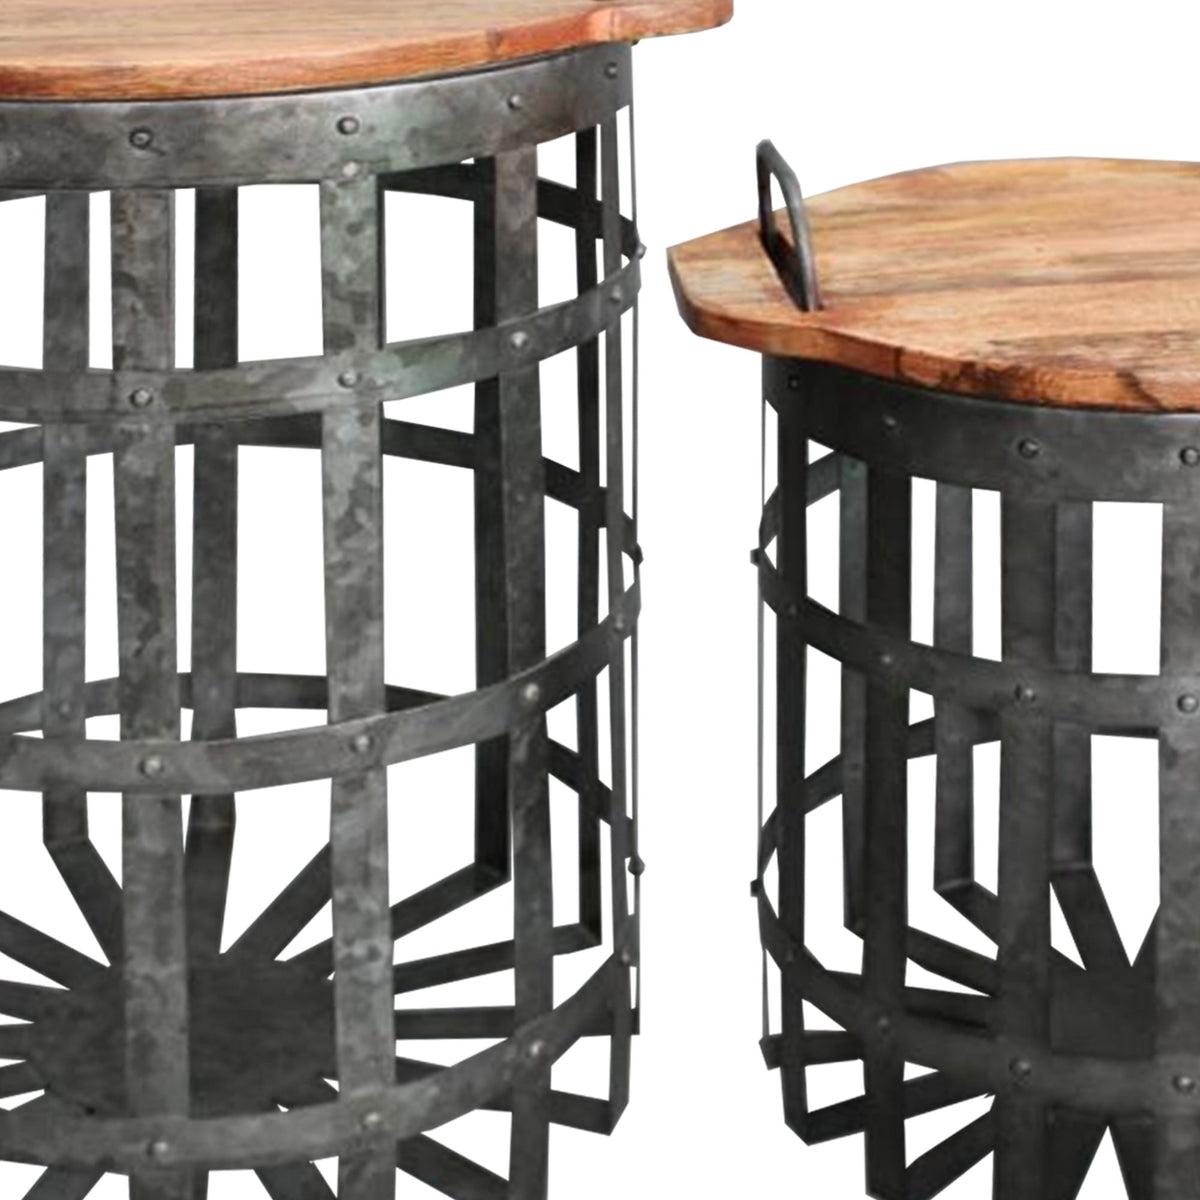 Industrial Grid Galvanized Accent End Table with Round Lid and Handles, Set of 2, Gray and Brown - I551-FDS003